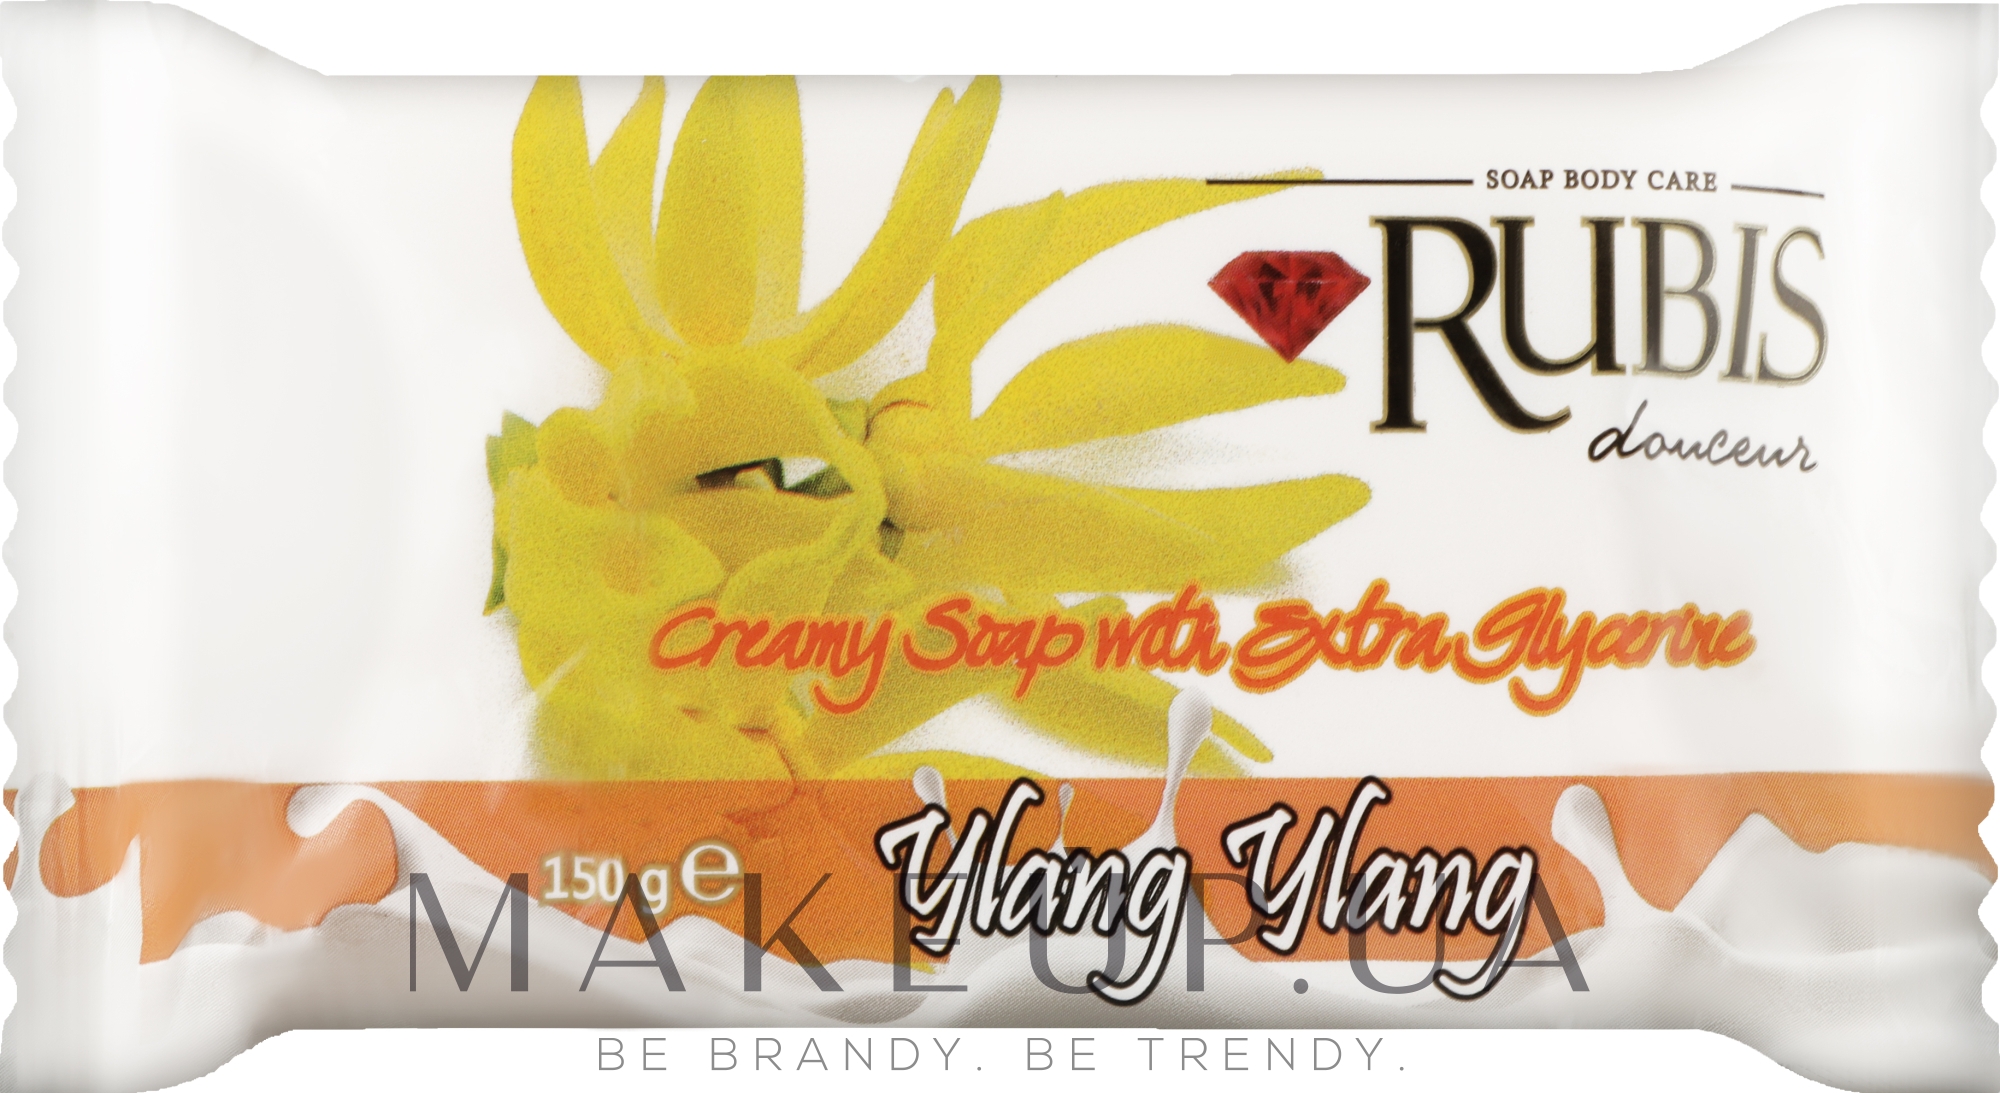 Мыло "Иланг-иланг" - Rubis Care Ylang Ylang Creamy Soap With Extra Glycerine — фото 150g